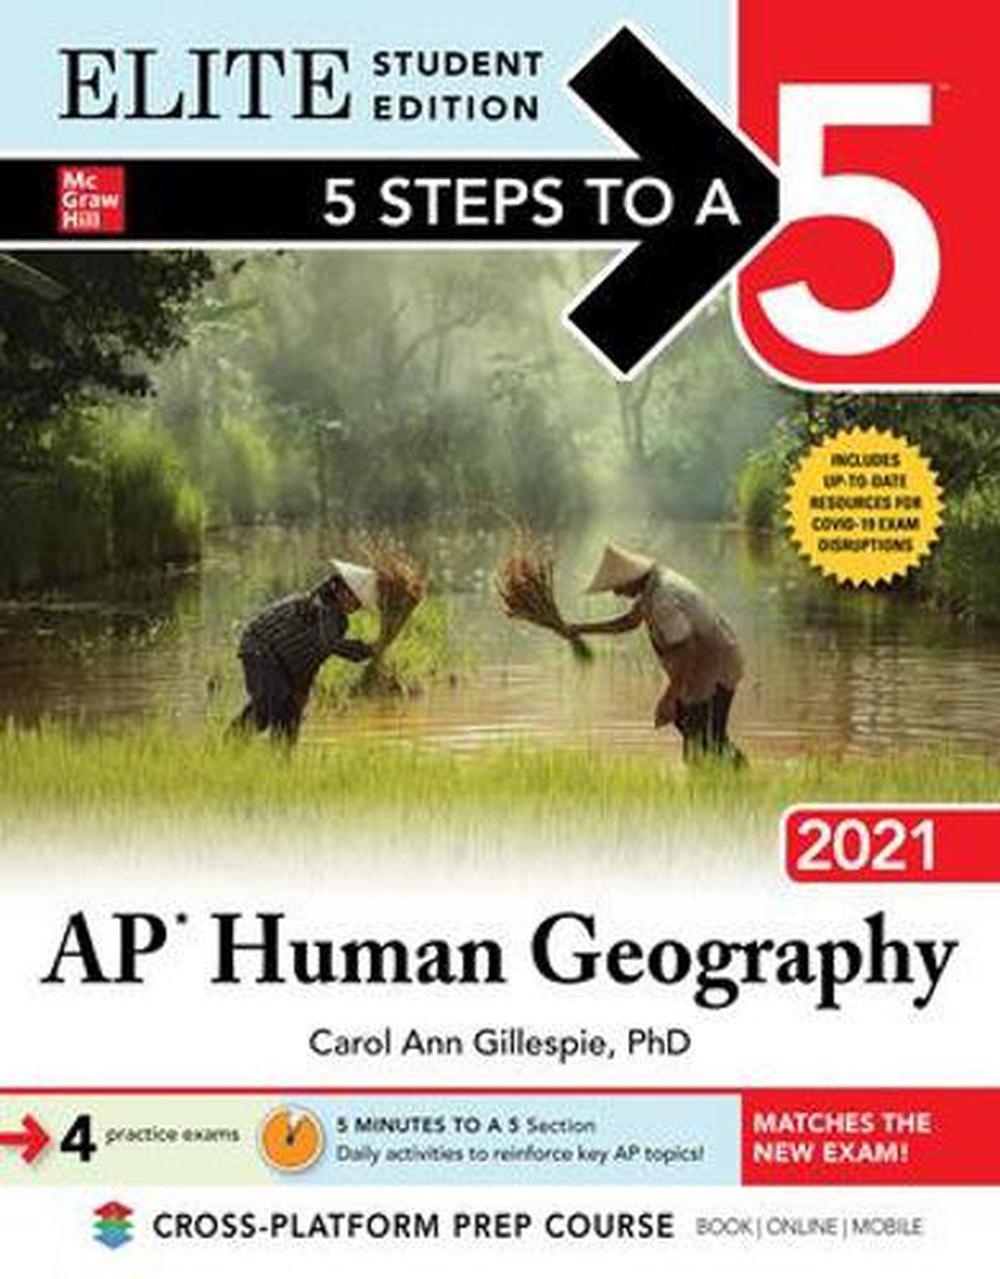 5 Steps to a 5 Ap Human Geography 2021 Elite Student Edition by Carol